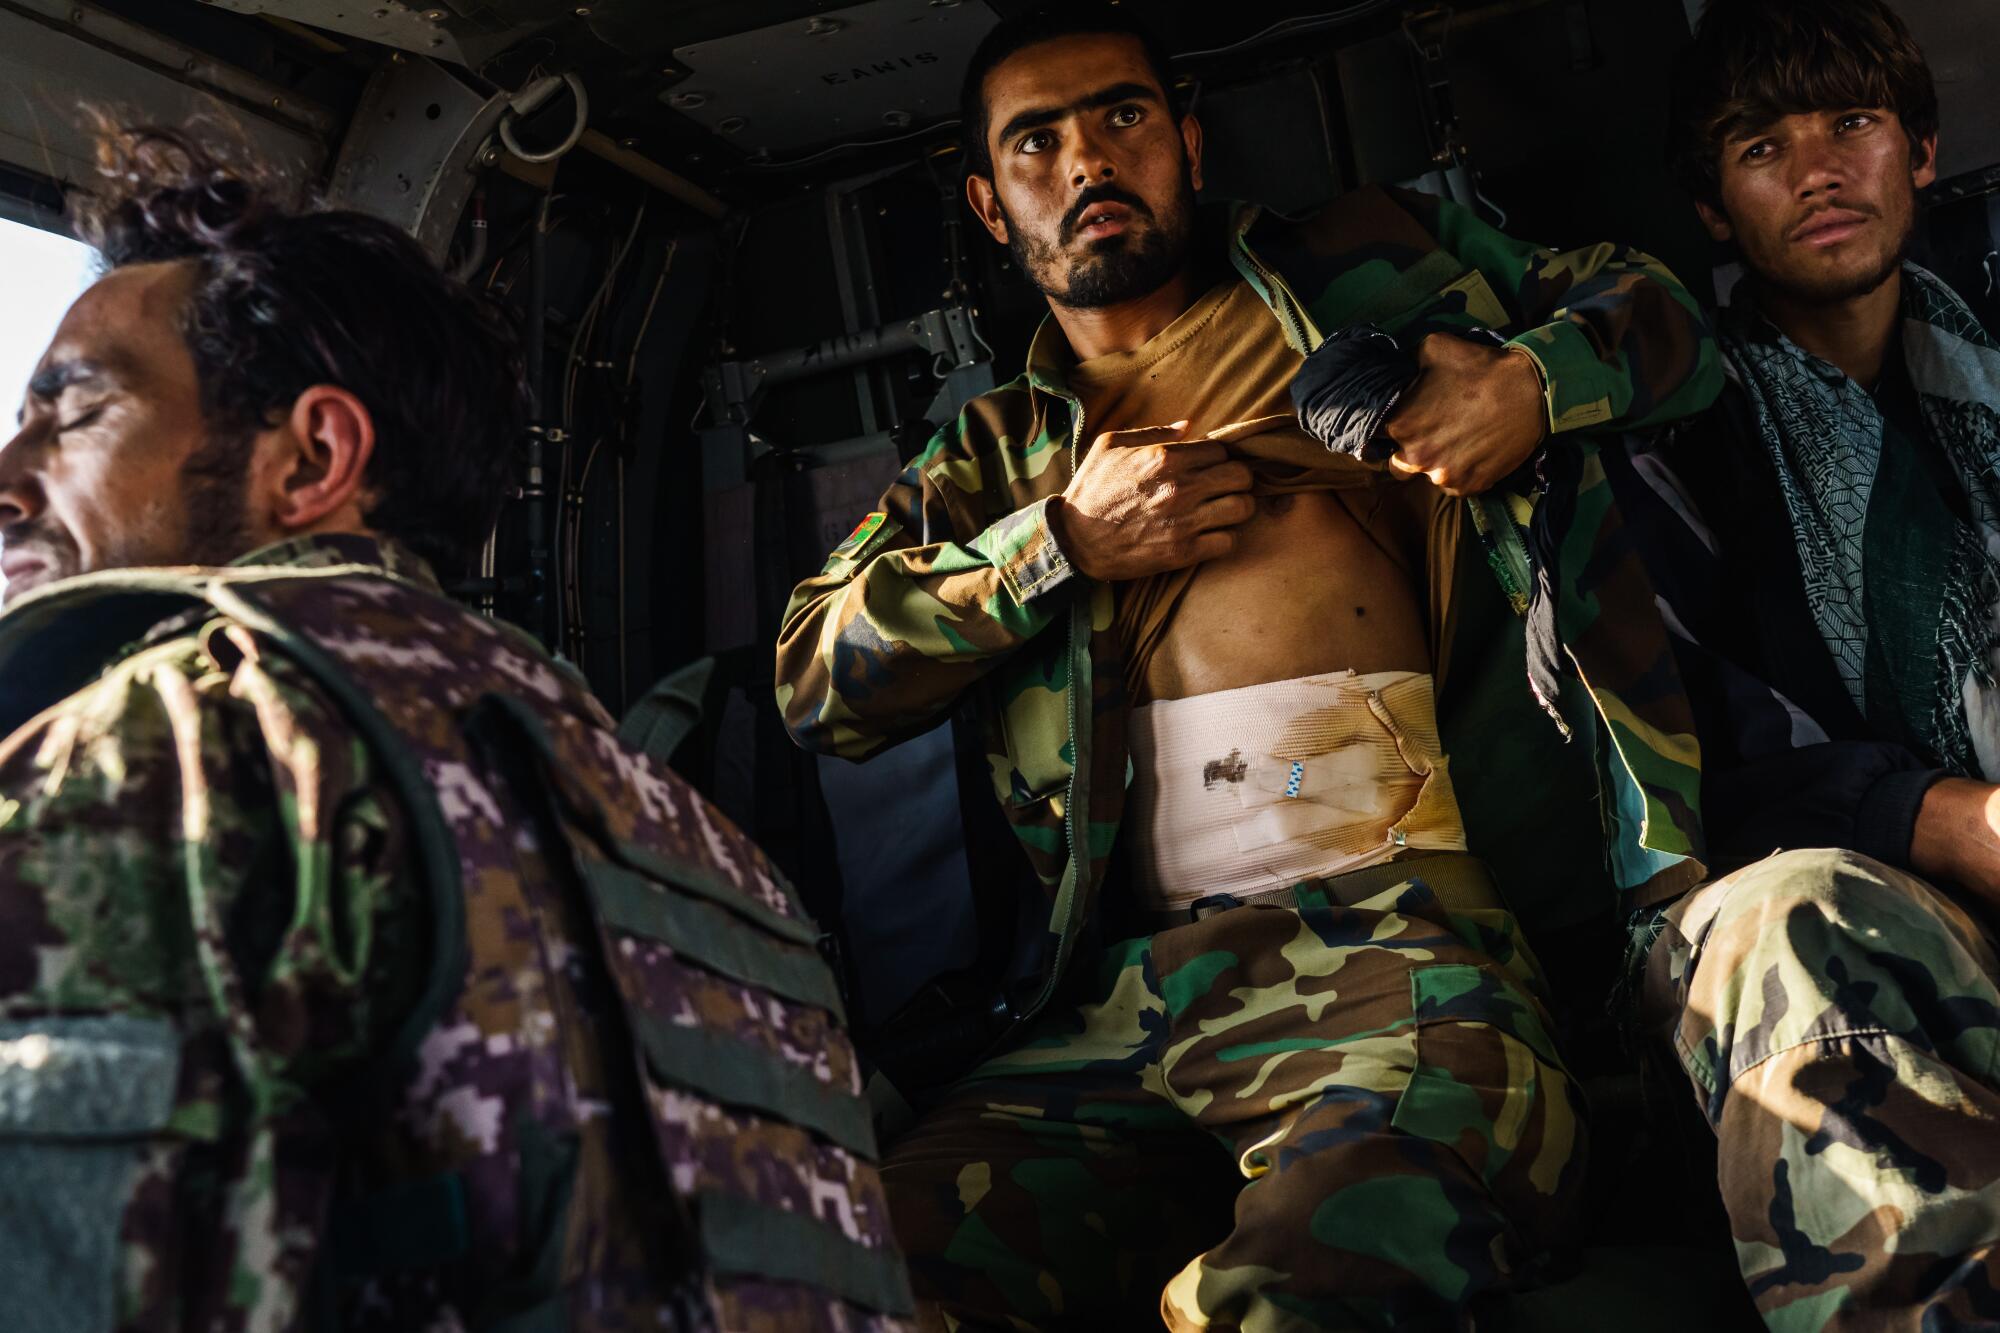  Soldiers, some wounded by Taliban gunfire, are aboard an UH-60 Blackhawk.